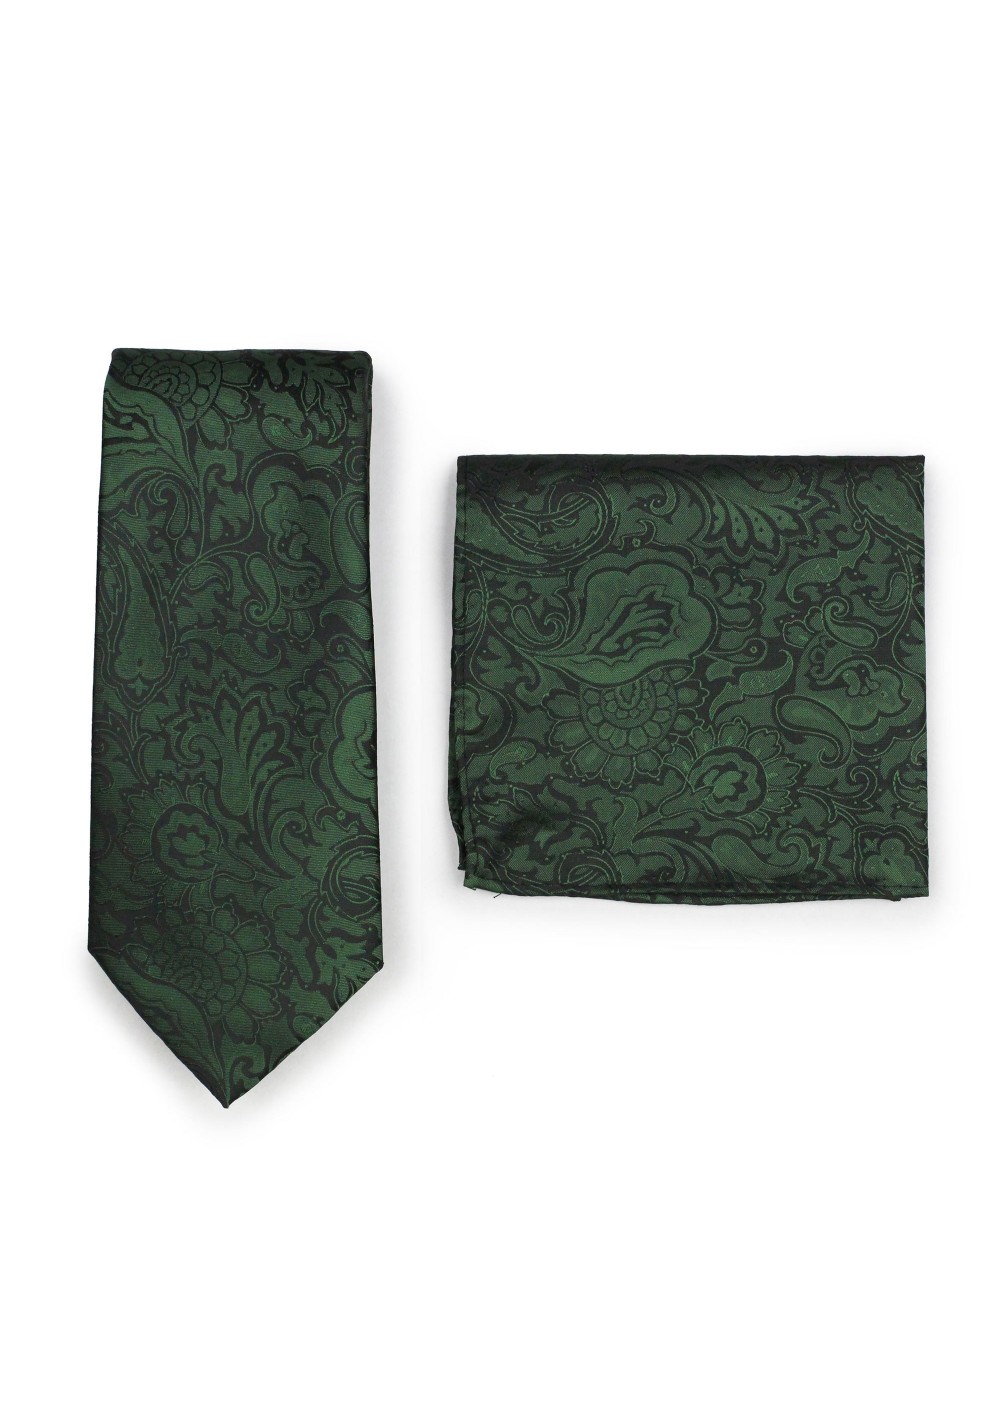 Pine Forest Green Paisley Tie + Hanky Set